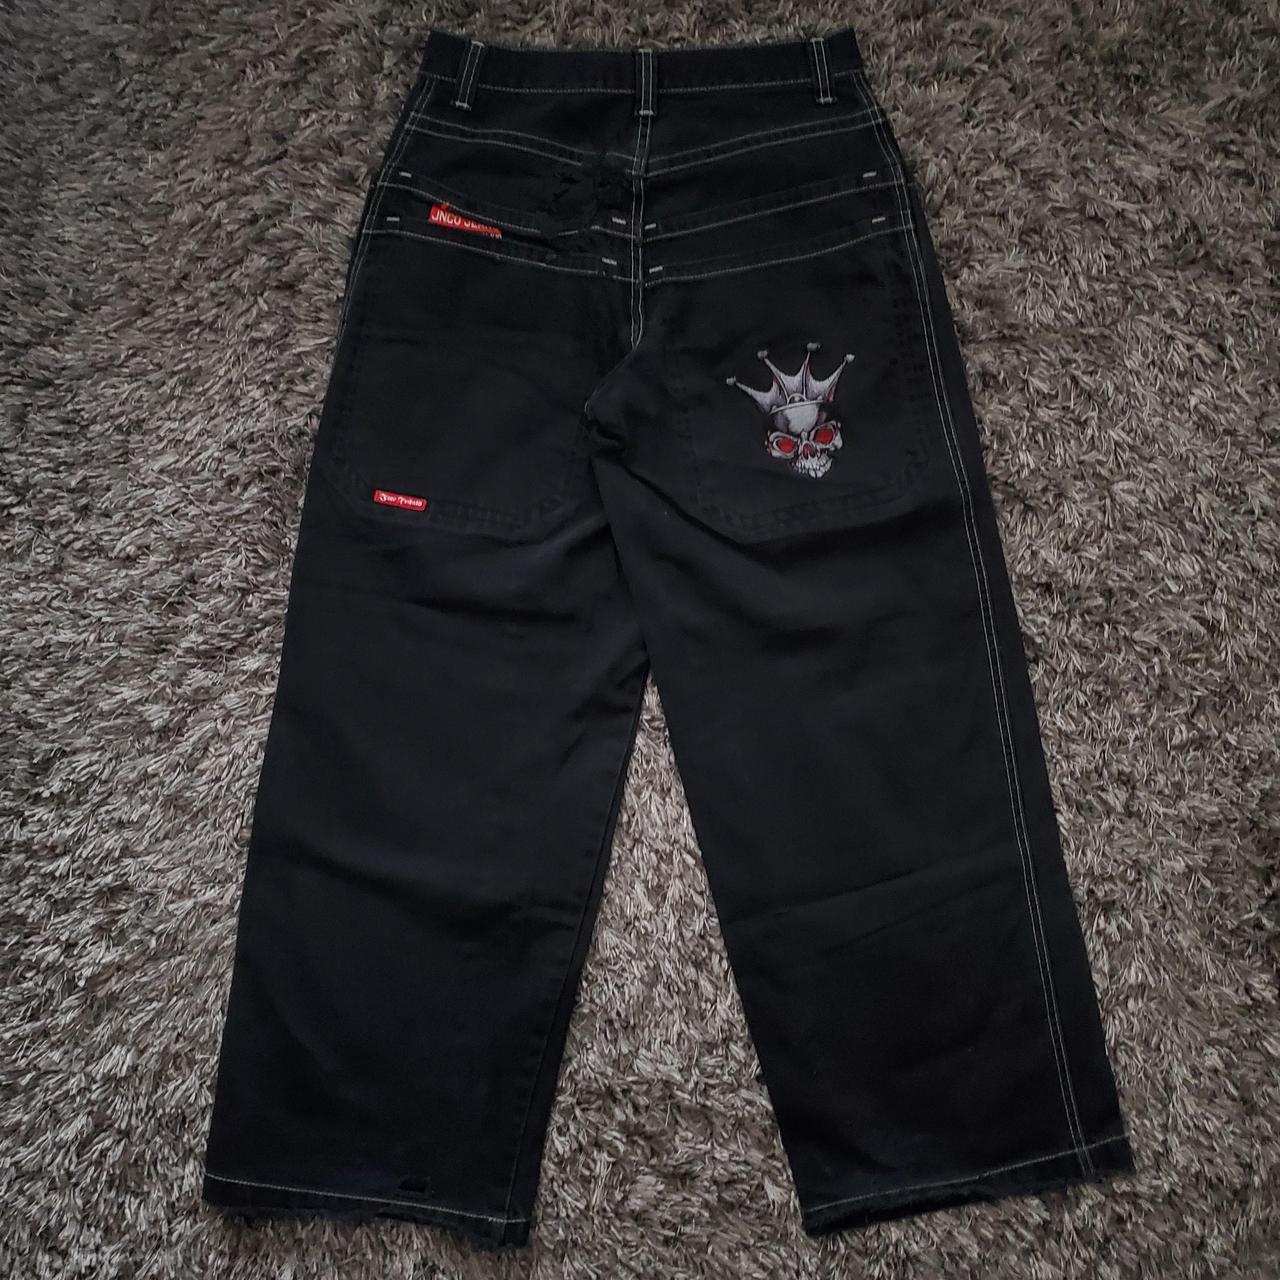 Skull jnco jeans wear these allot so they kinda... - Depop